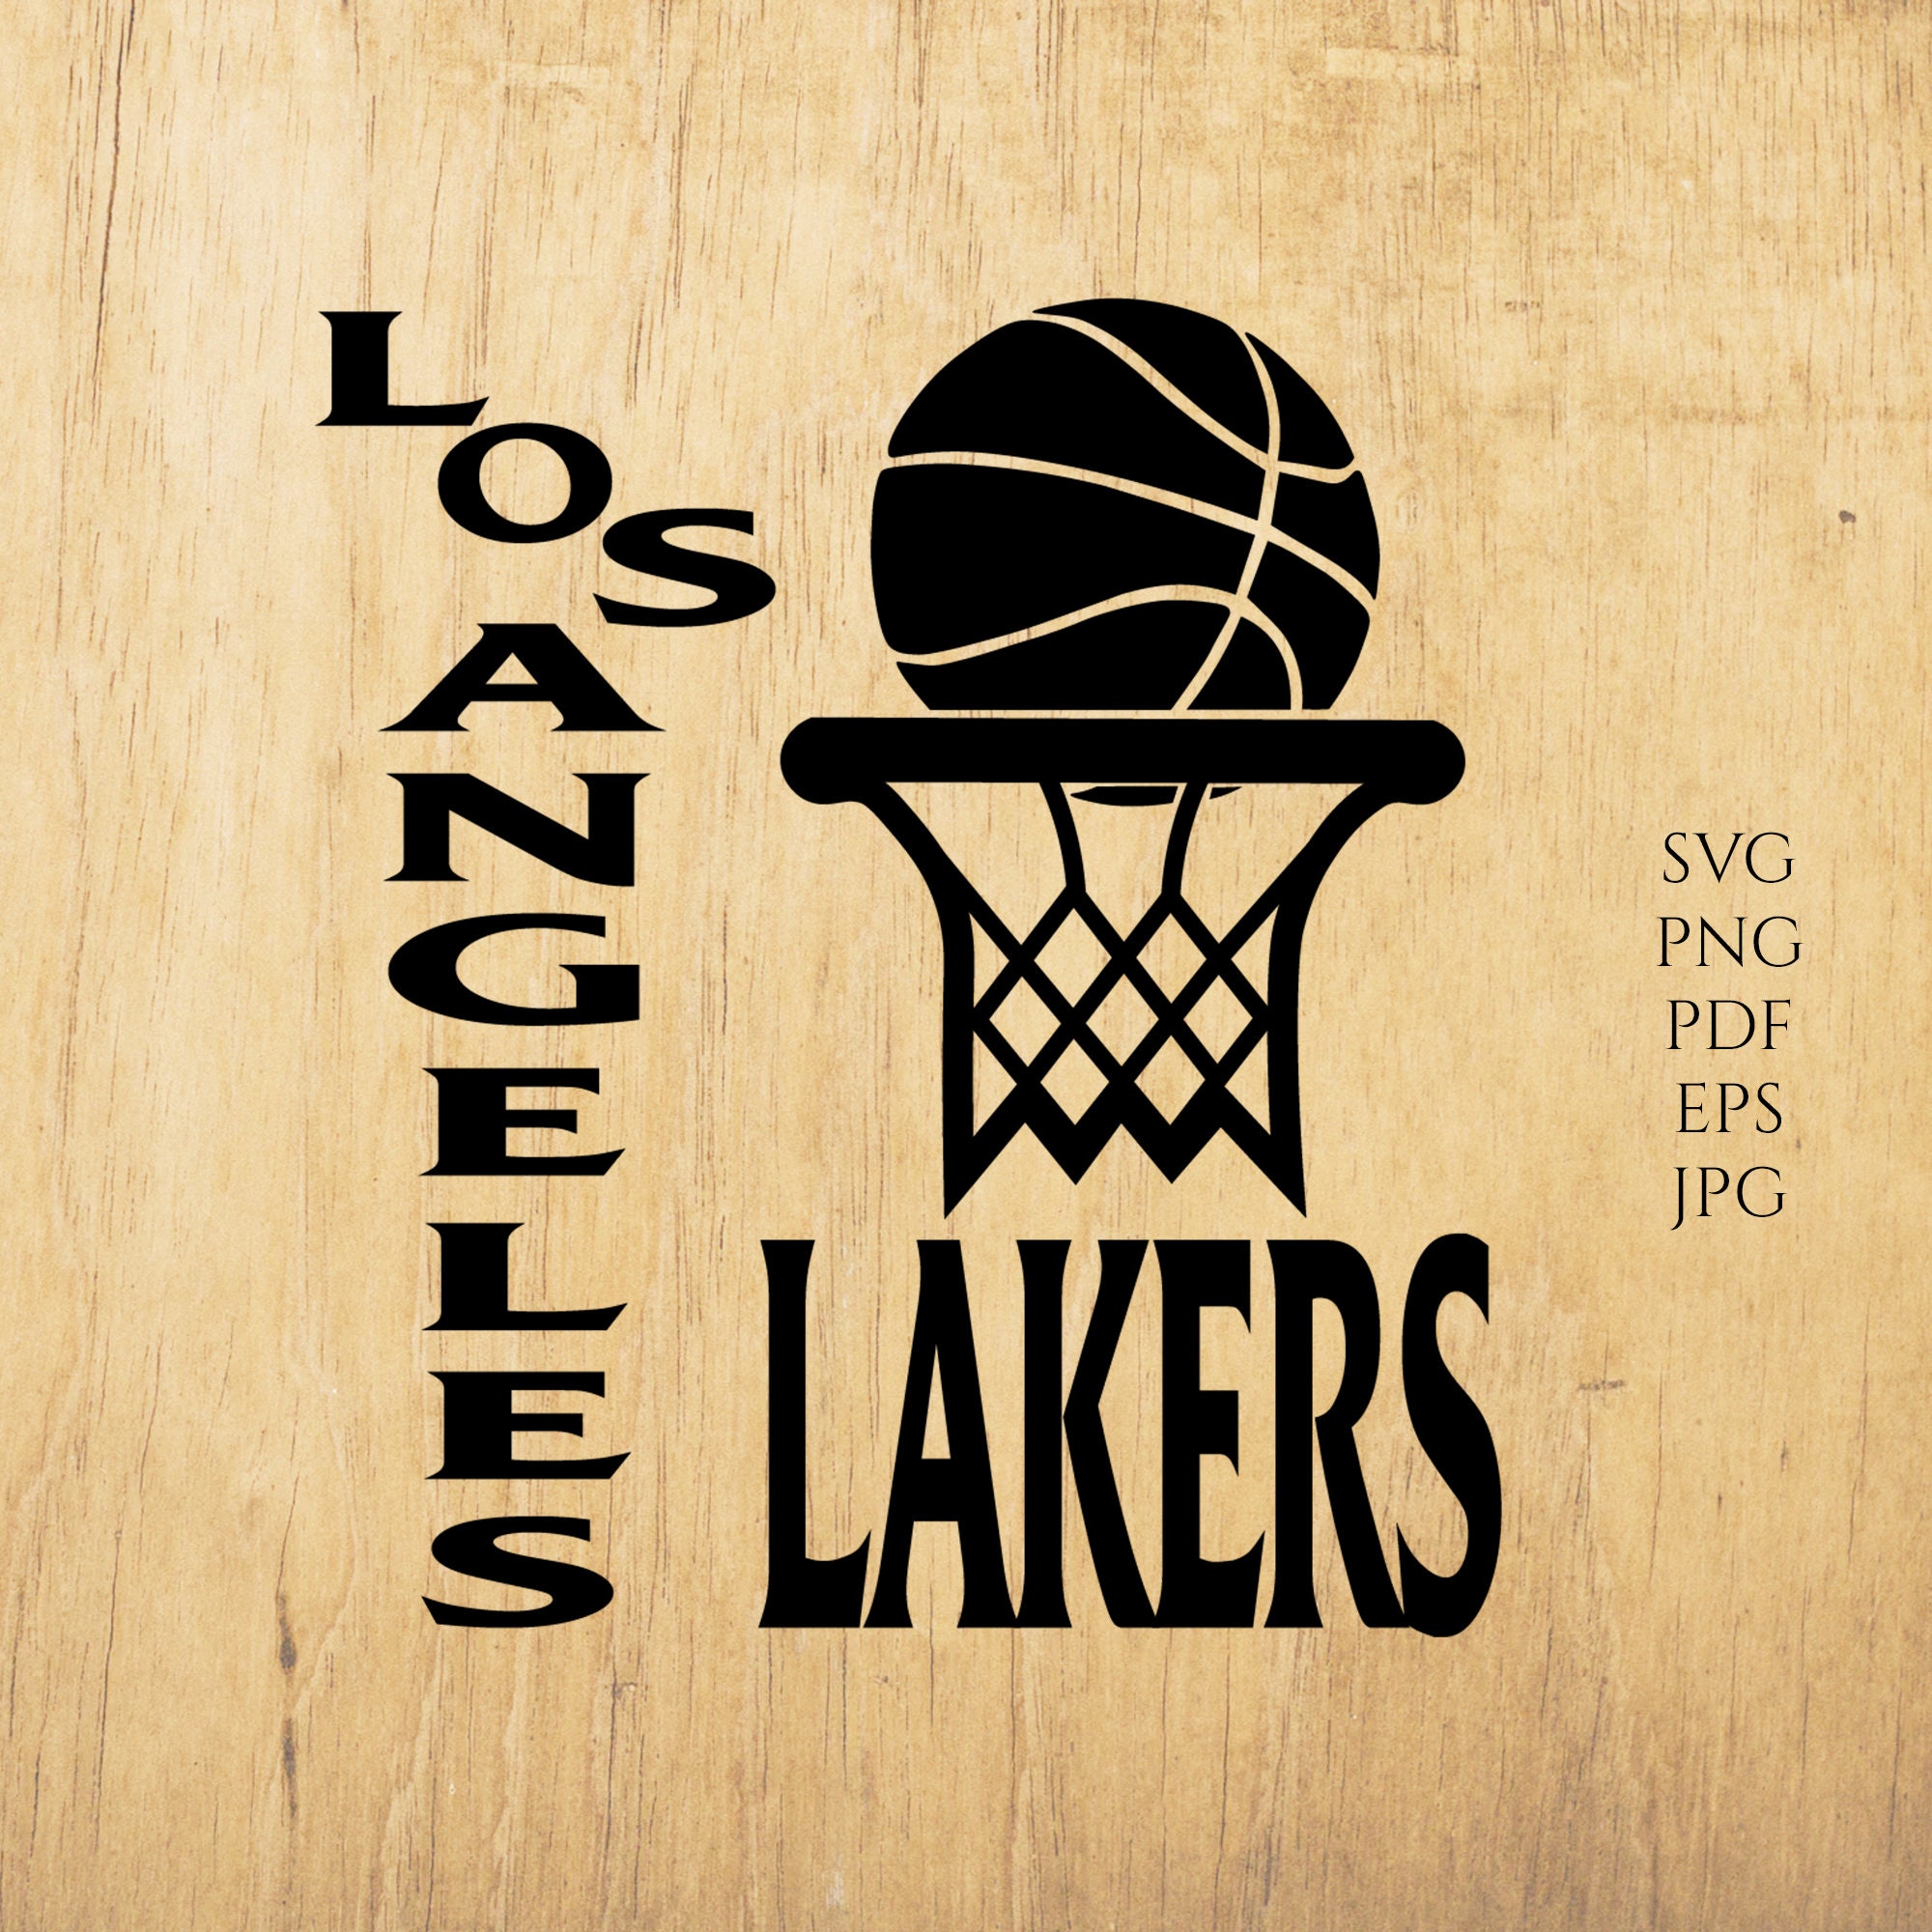 Lakers Vector Images (over 290)